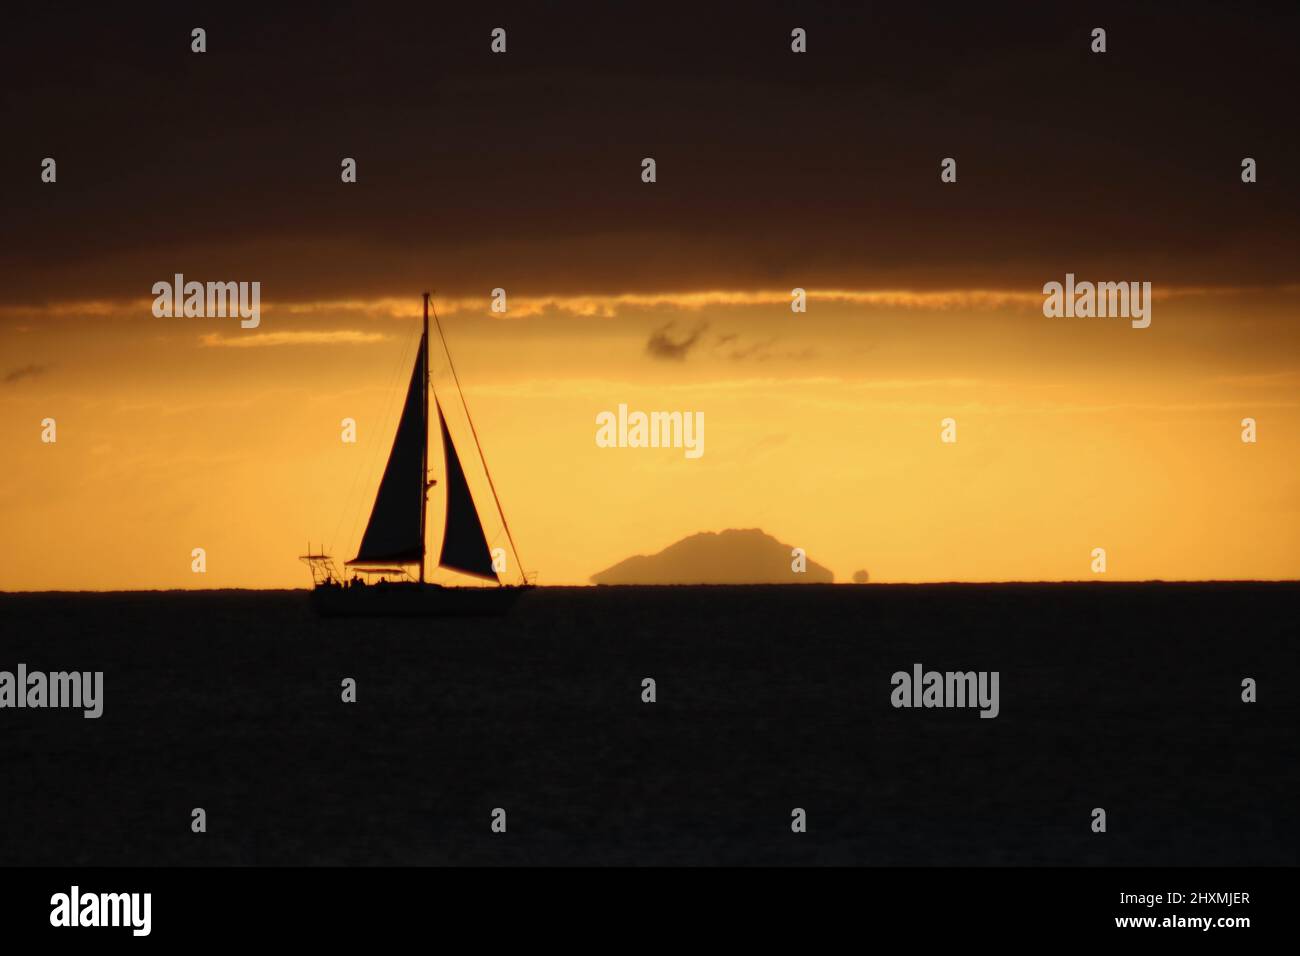 Black Silhouette of a yacht against a Caribbean sunset on Antigua and Barbuda Stock Photo